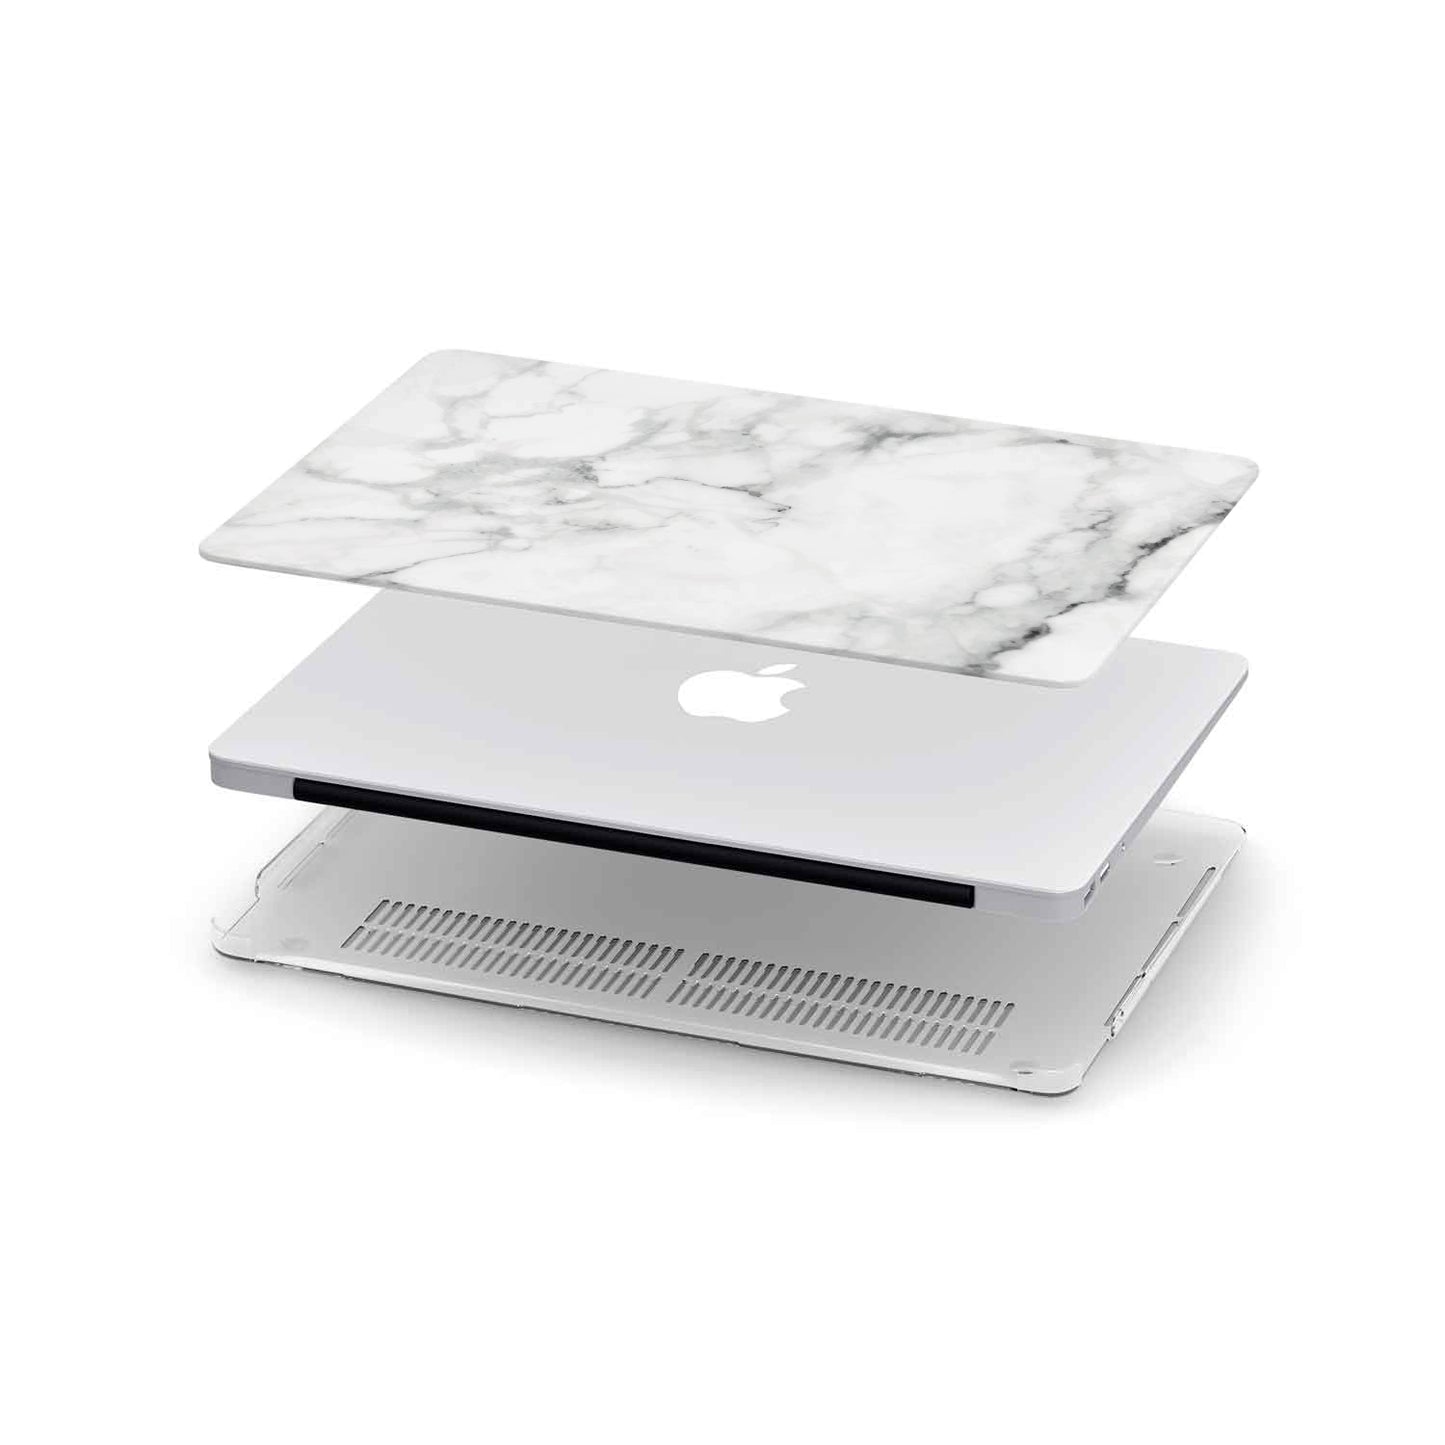 Macbook Hard Shell Case - White Marble (Personalized)